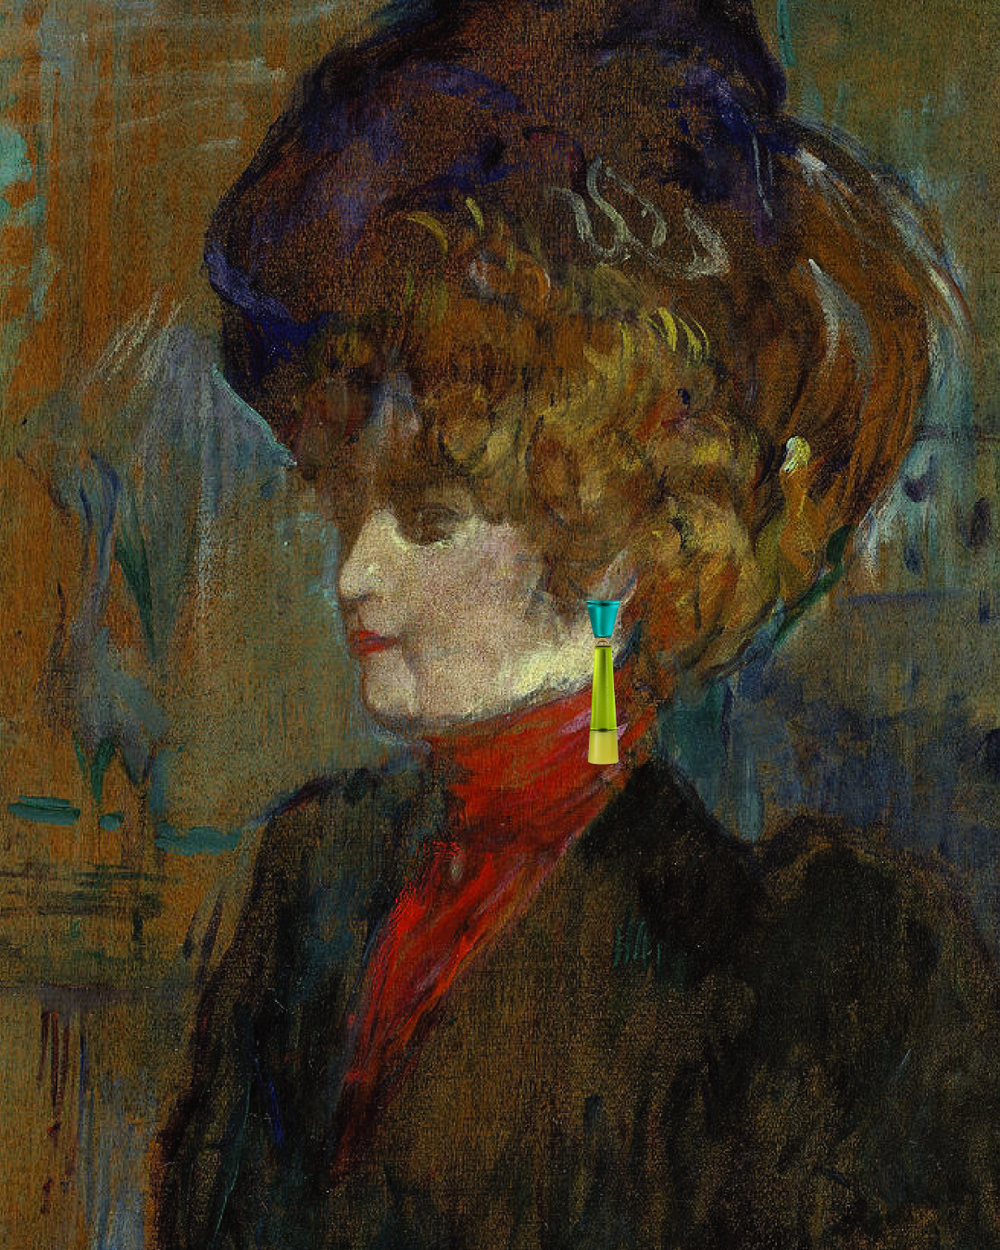 Art-time-travelling-with-Lautrec-1898.png